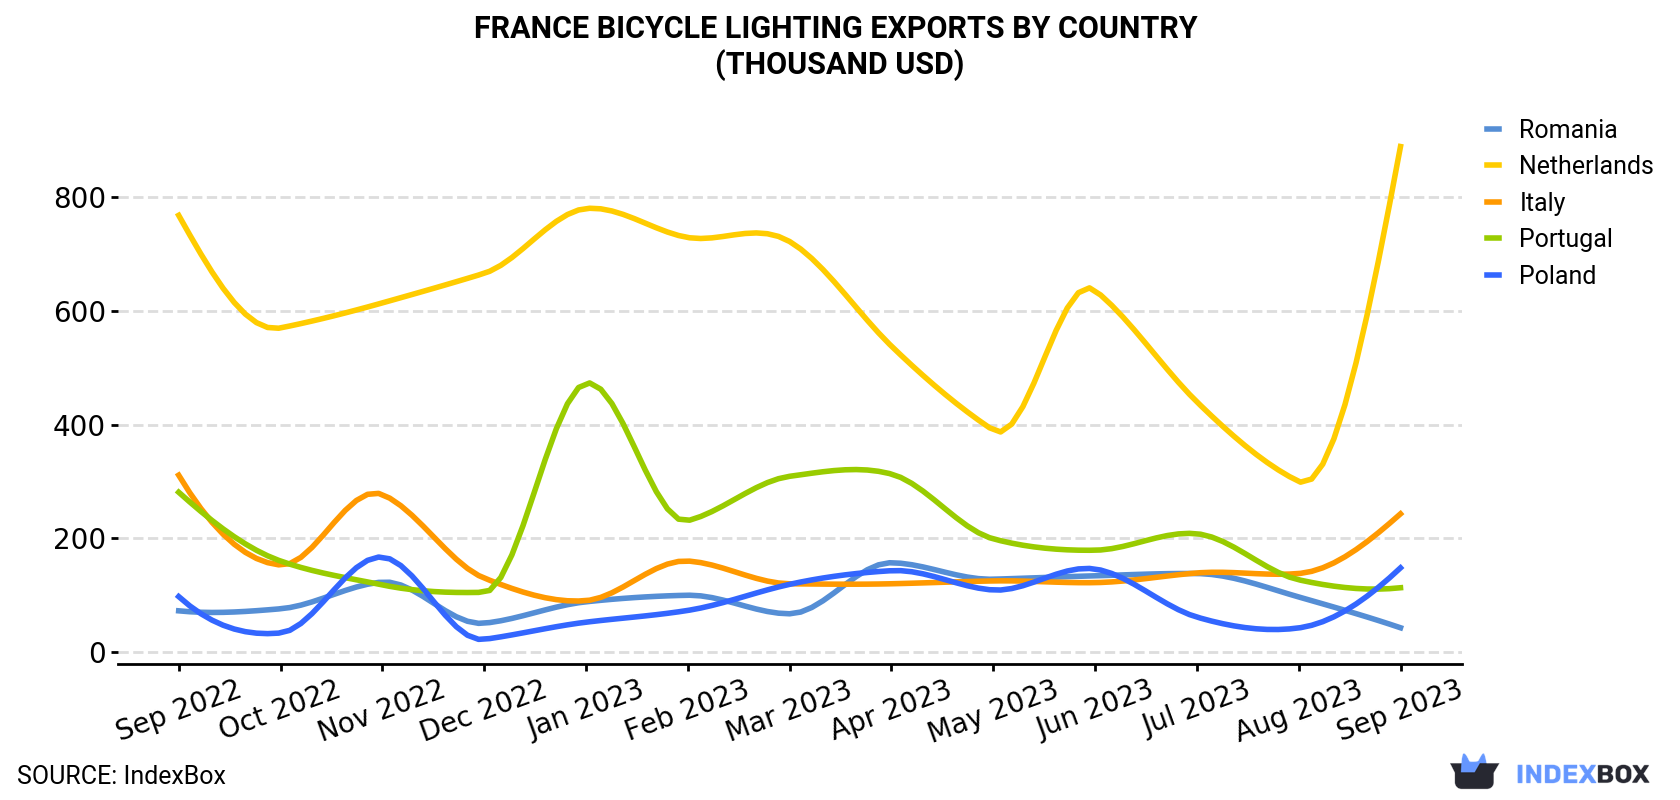 France Bicycle Lighting Exports By Country (Thousand USD)